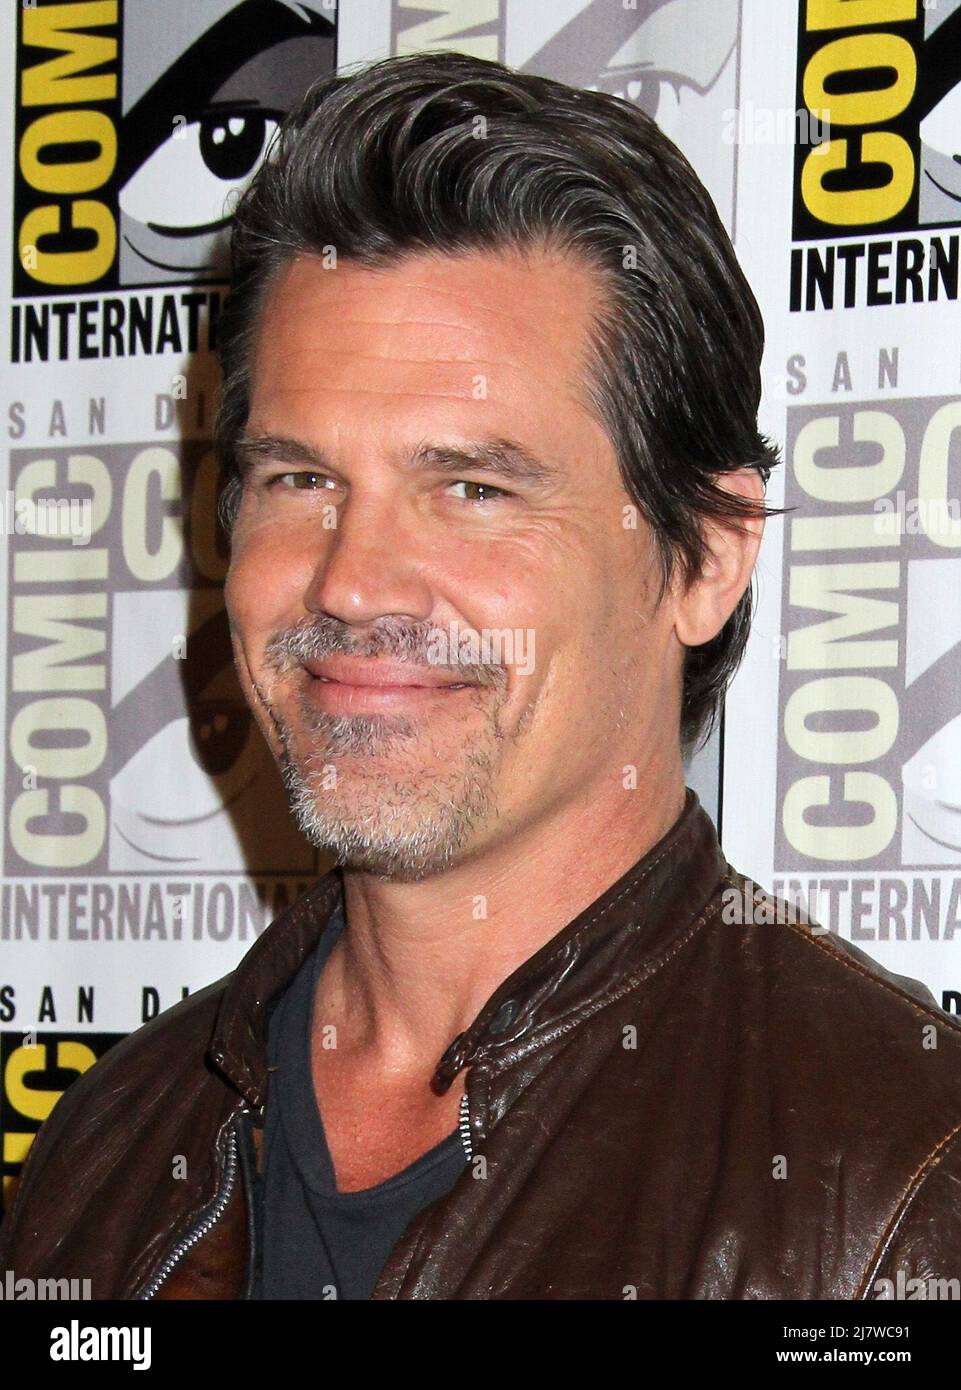 SAN DIEGO - JUL 26:  Josh Brolin at the 'Sin City: A Dame To Kill For' Comic Con Red Carpet at the Hilton San Diego Bayfront on July 26, 2014 in San Diego, CA Stock Photo